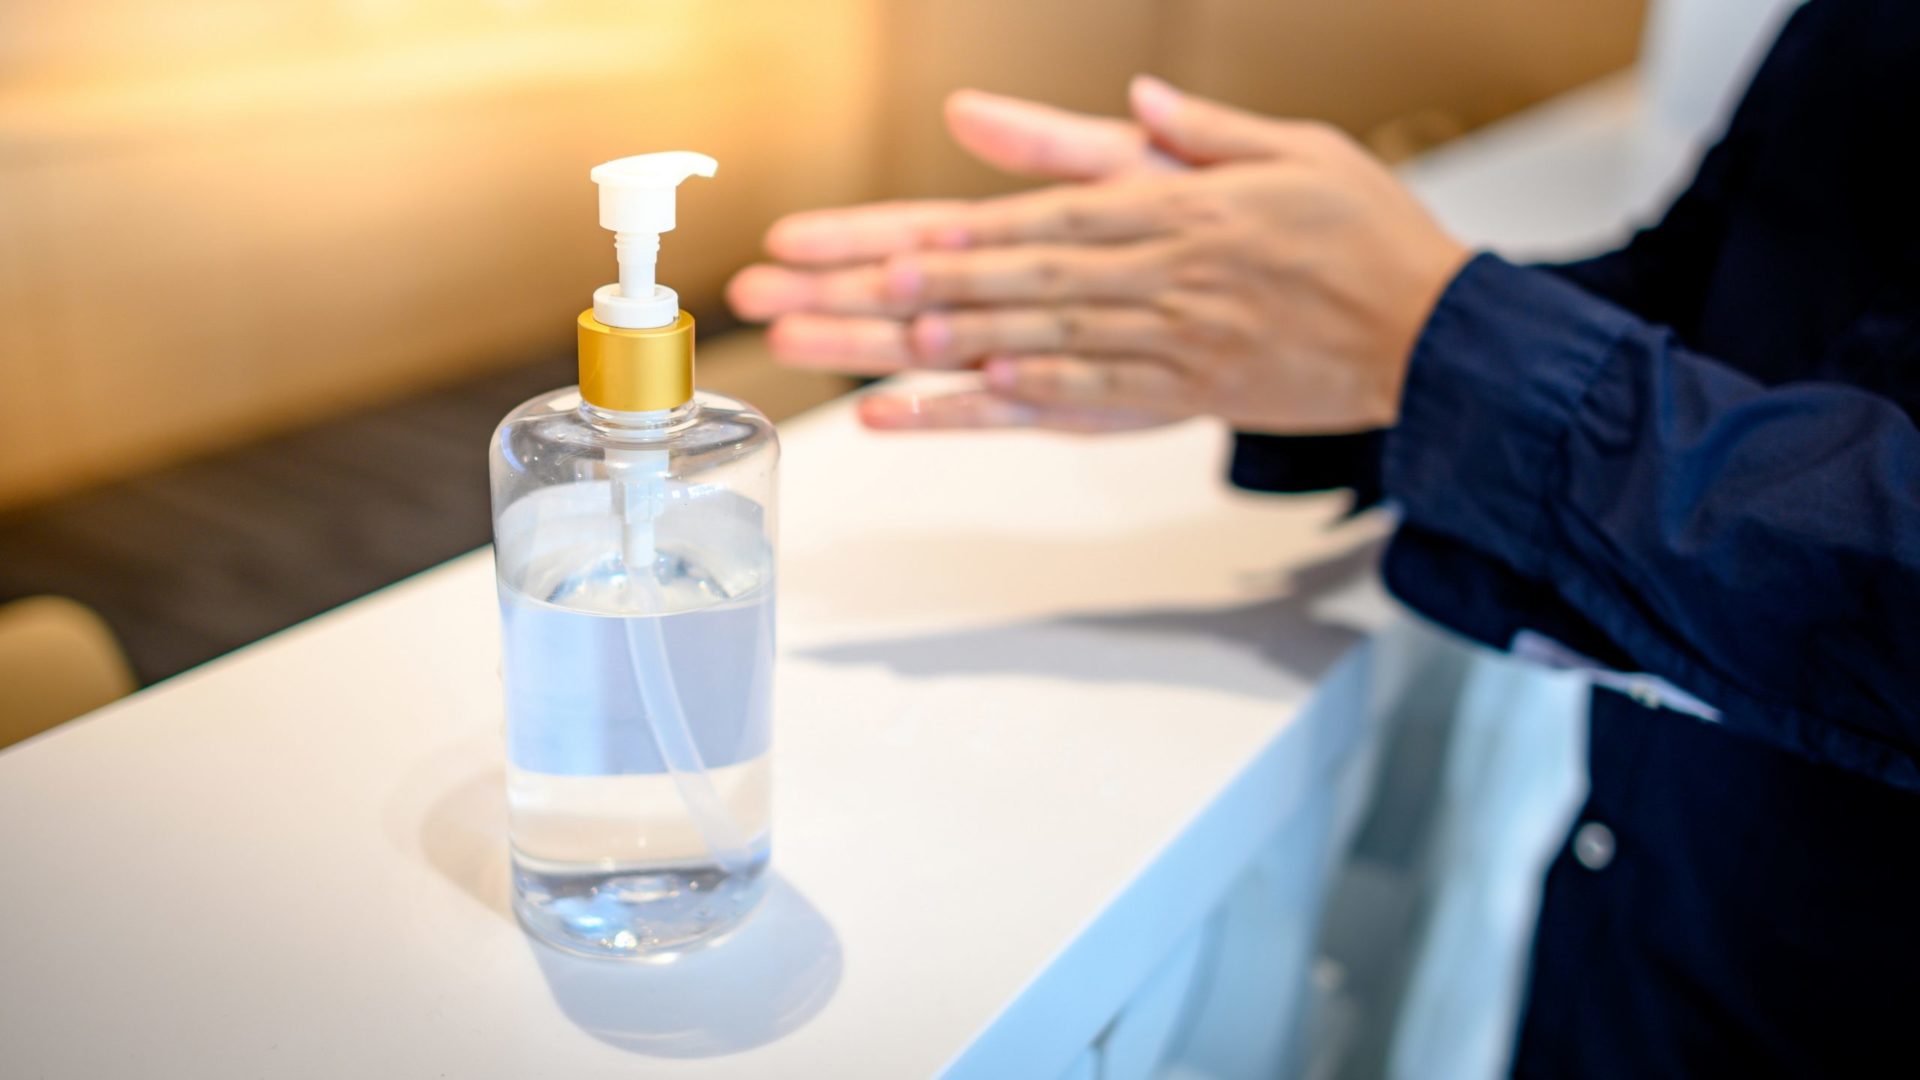 FDA Warns Against Use of Toxic Hand Sanitizer